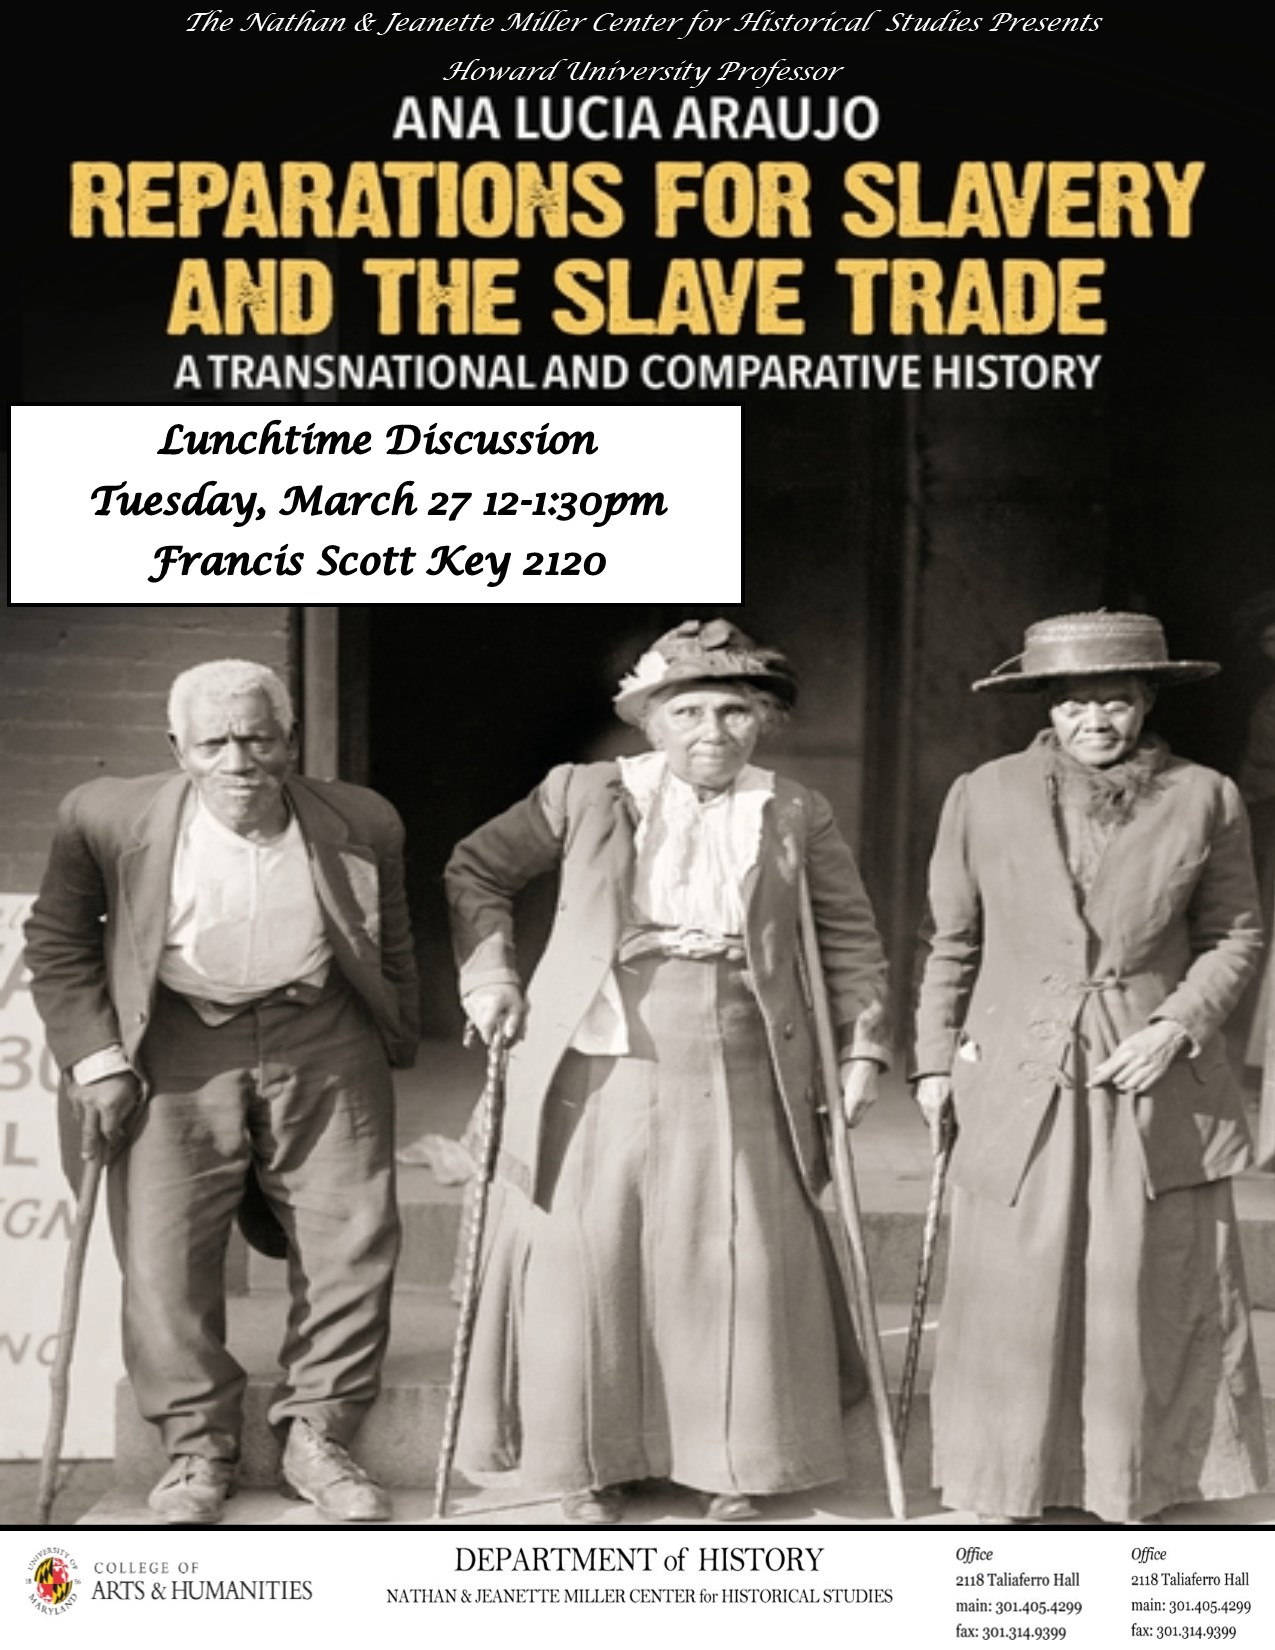 Image for event - Reparations for Slavery and the Slave Trade: A Transnational and Comparative History